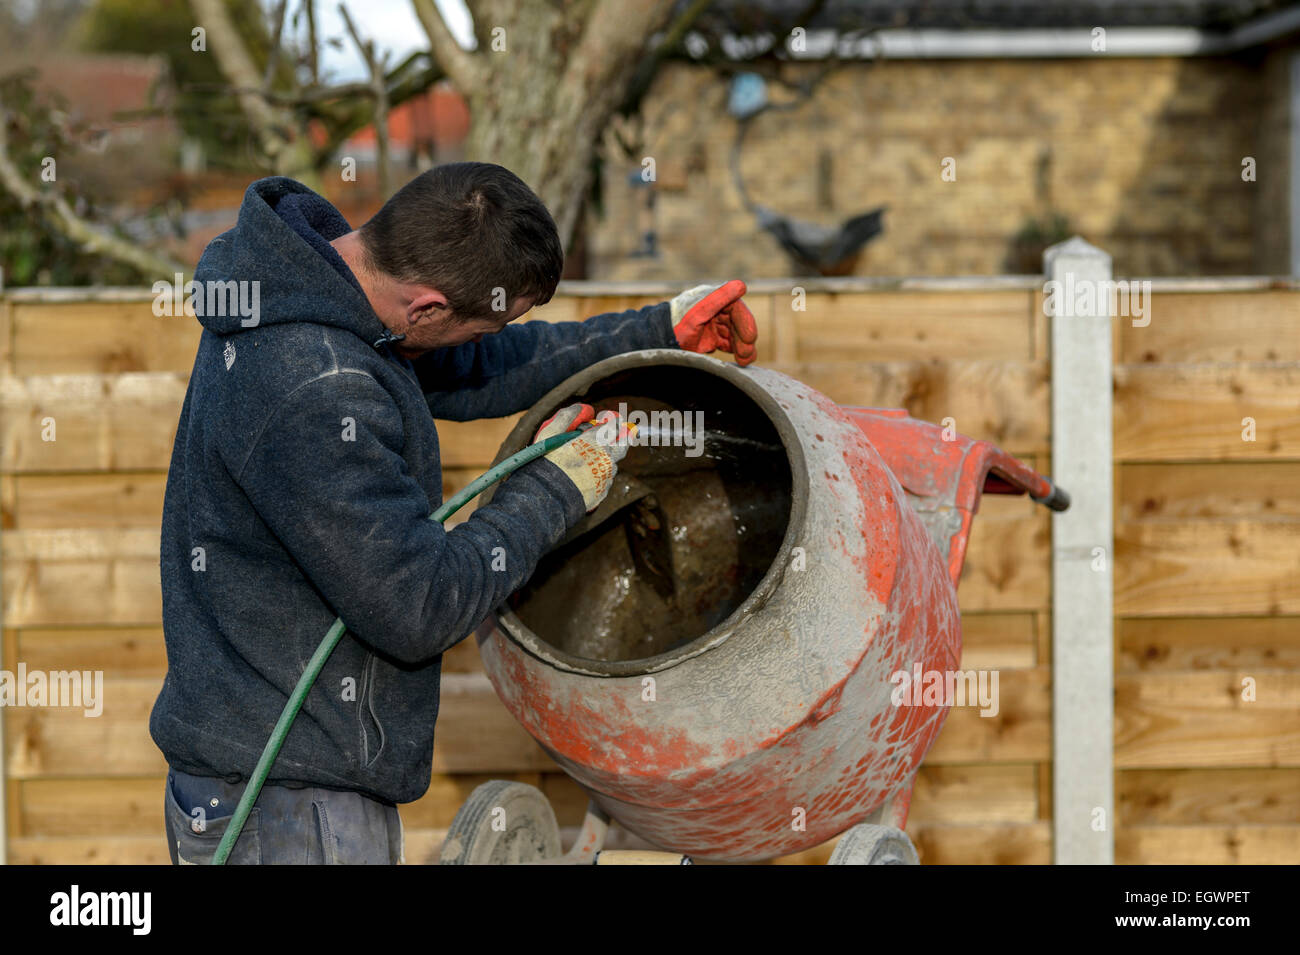 A labourer laborer hosing down the inside of a portable mortar concrete cement mixer on a home improvement project in Britain. Stock Photo